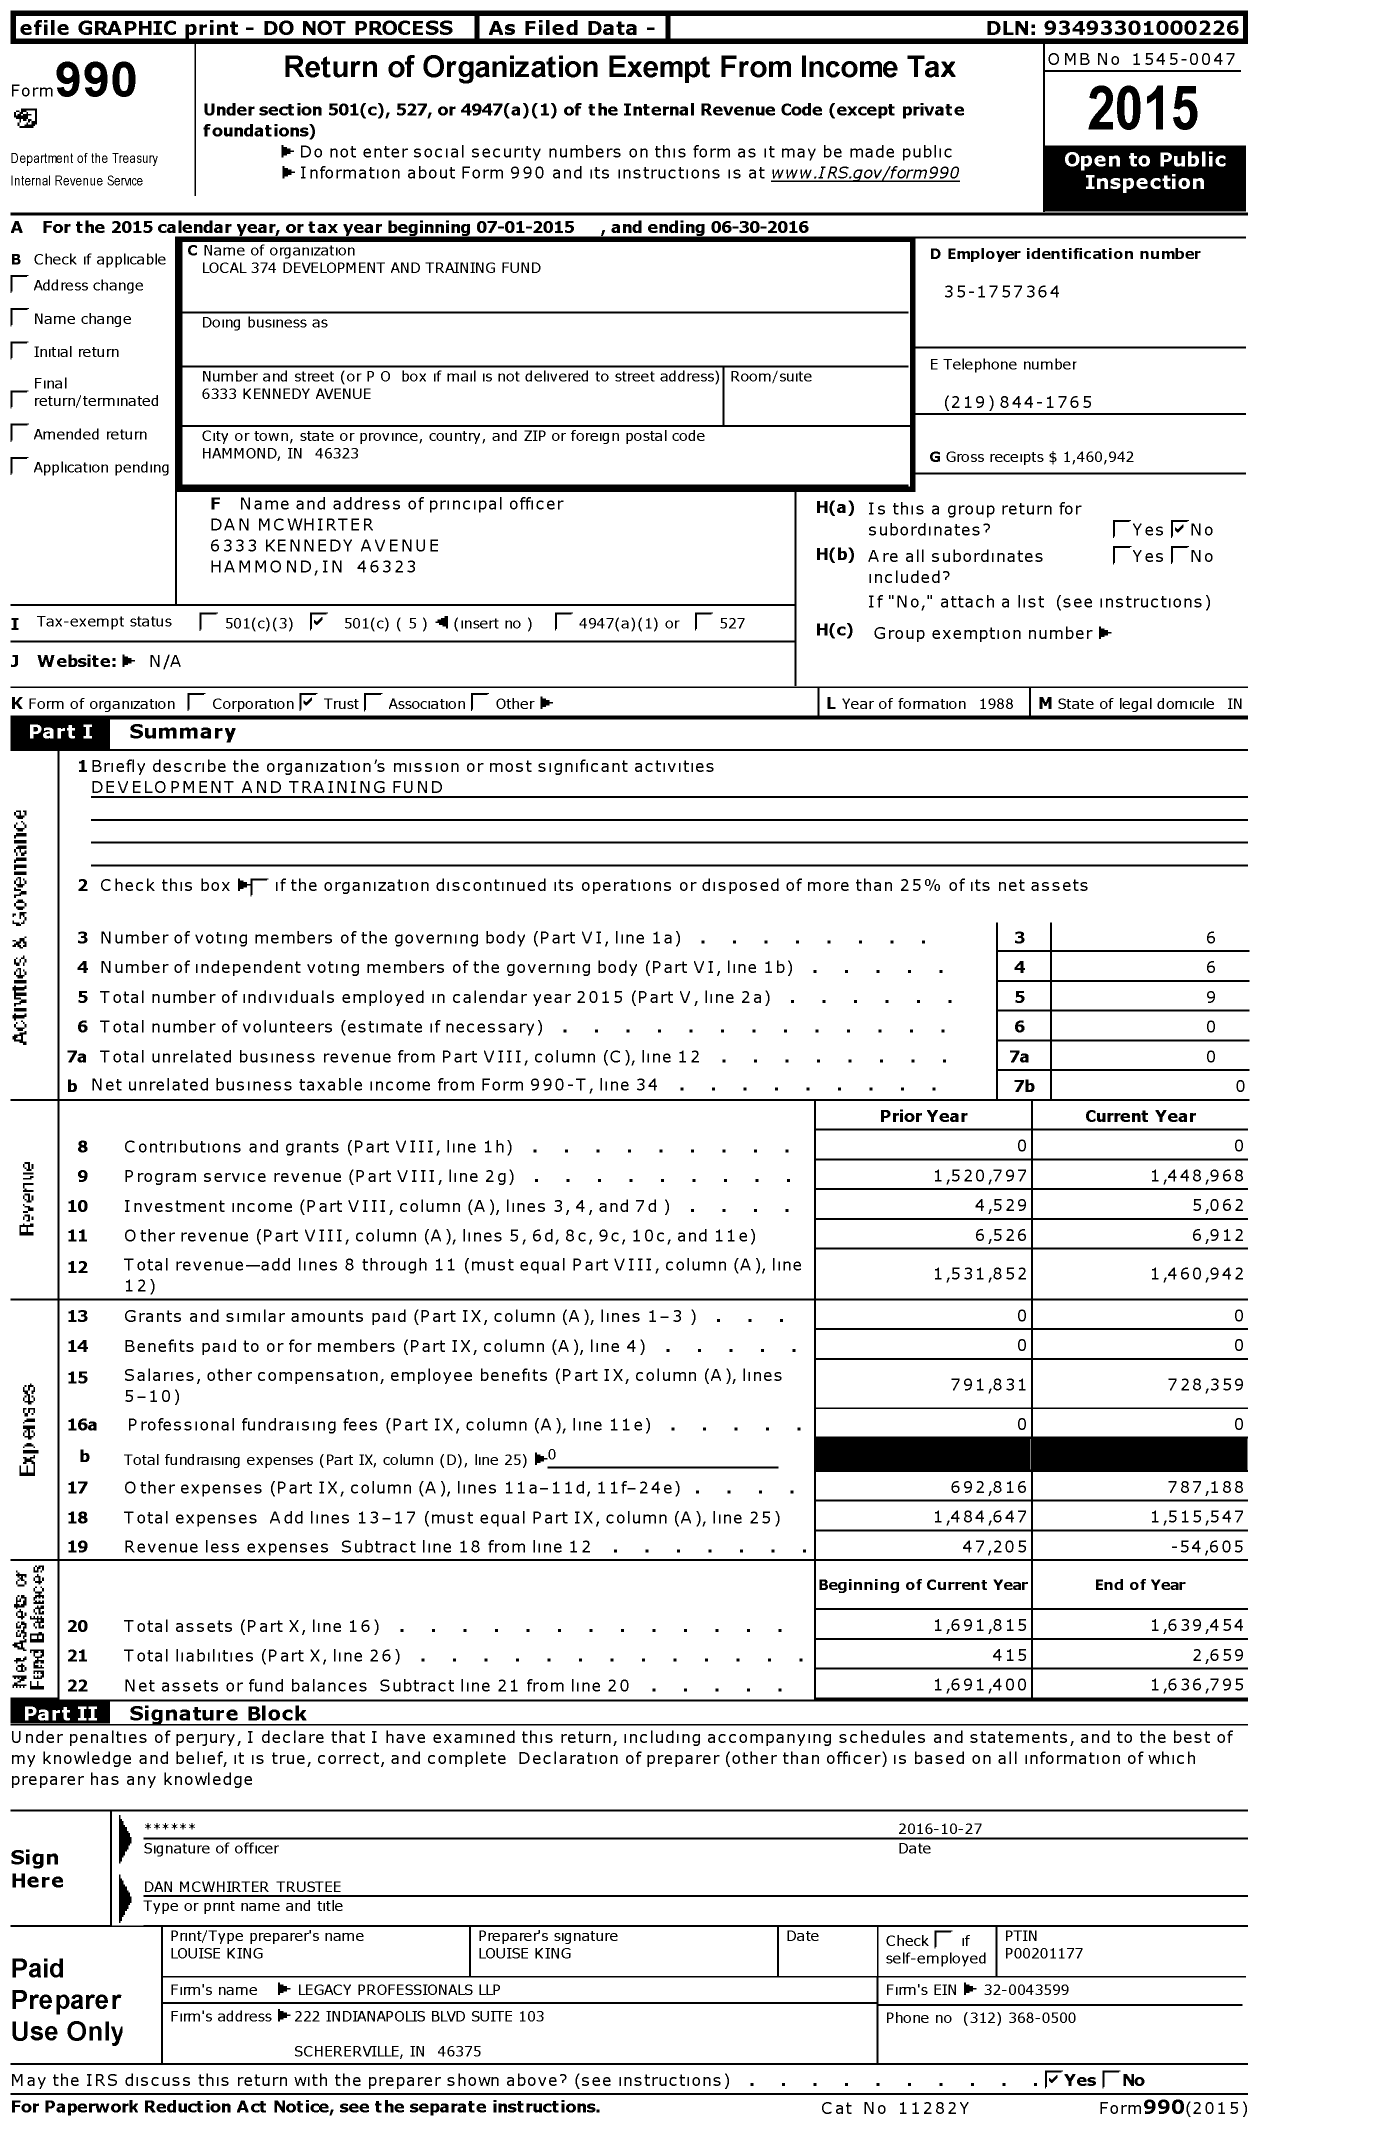 Image of first page of 2015 Form 990O for Local 374 Development and Training Fund